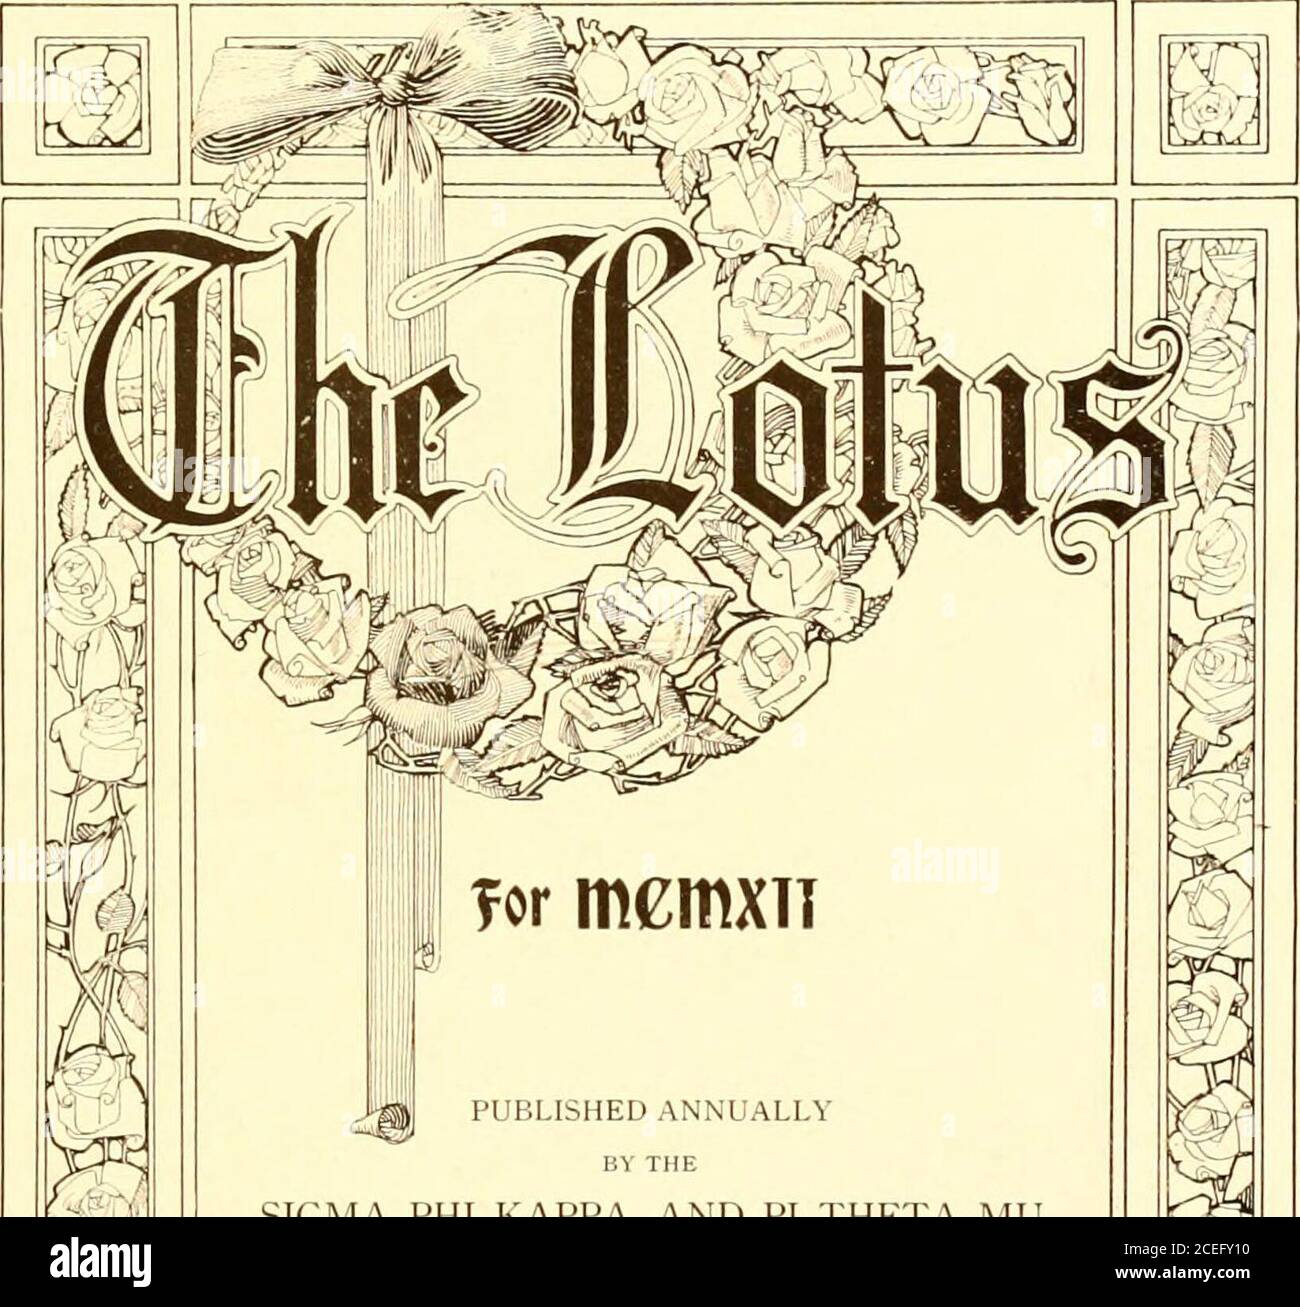 The Lotus. PUBLISHED ANNULI BY THE SIGMA PHI KAPPA AND PI THETA MULITERARY  SOCIETIES OF Peace Institute Raleigb, north Carolina ^ ,€. 1 m Digitized by  the Internet Archive in 2010